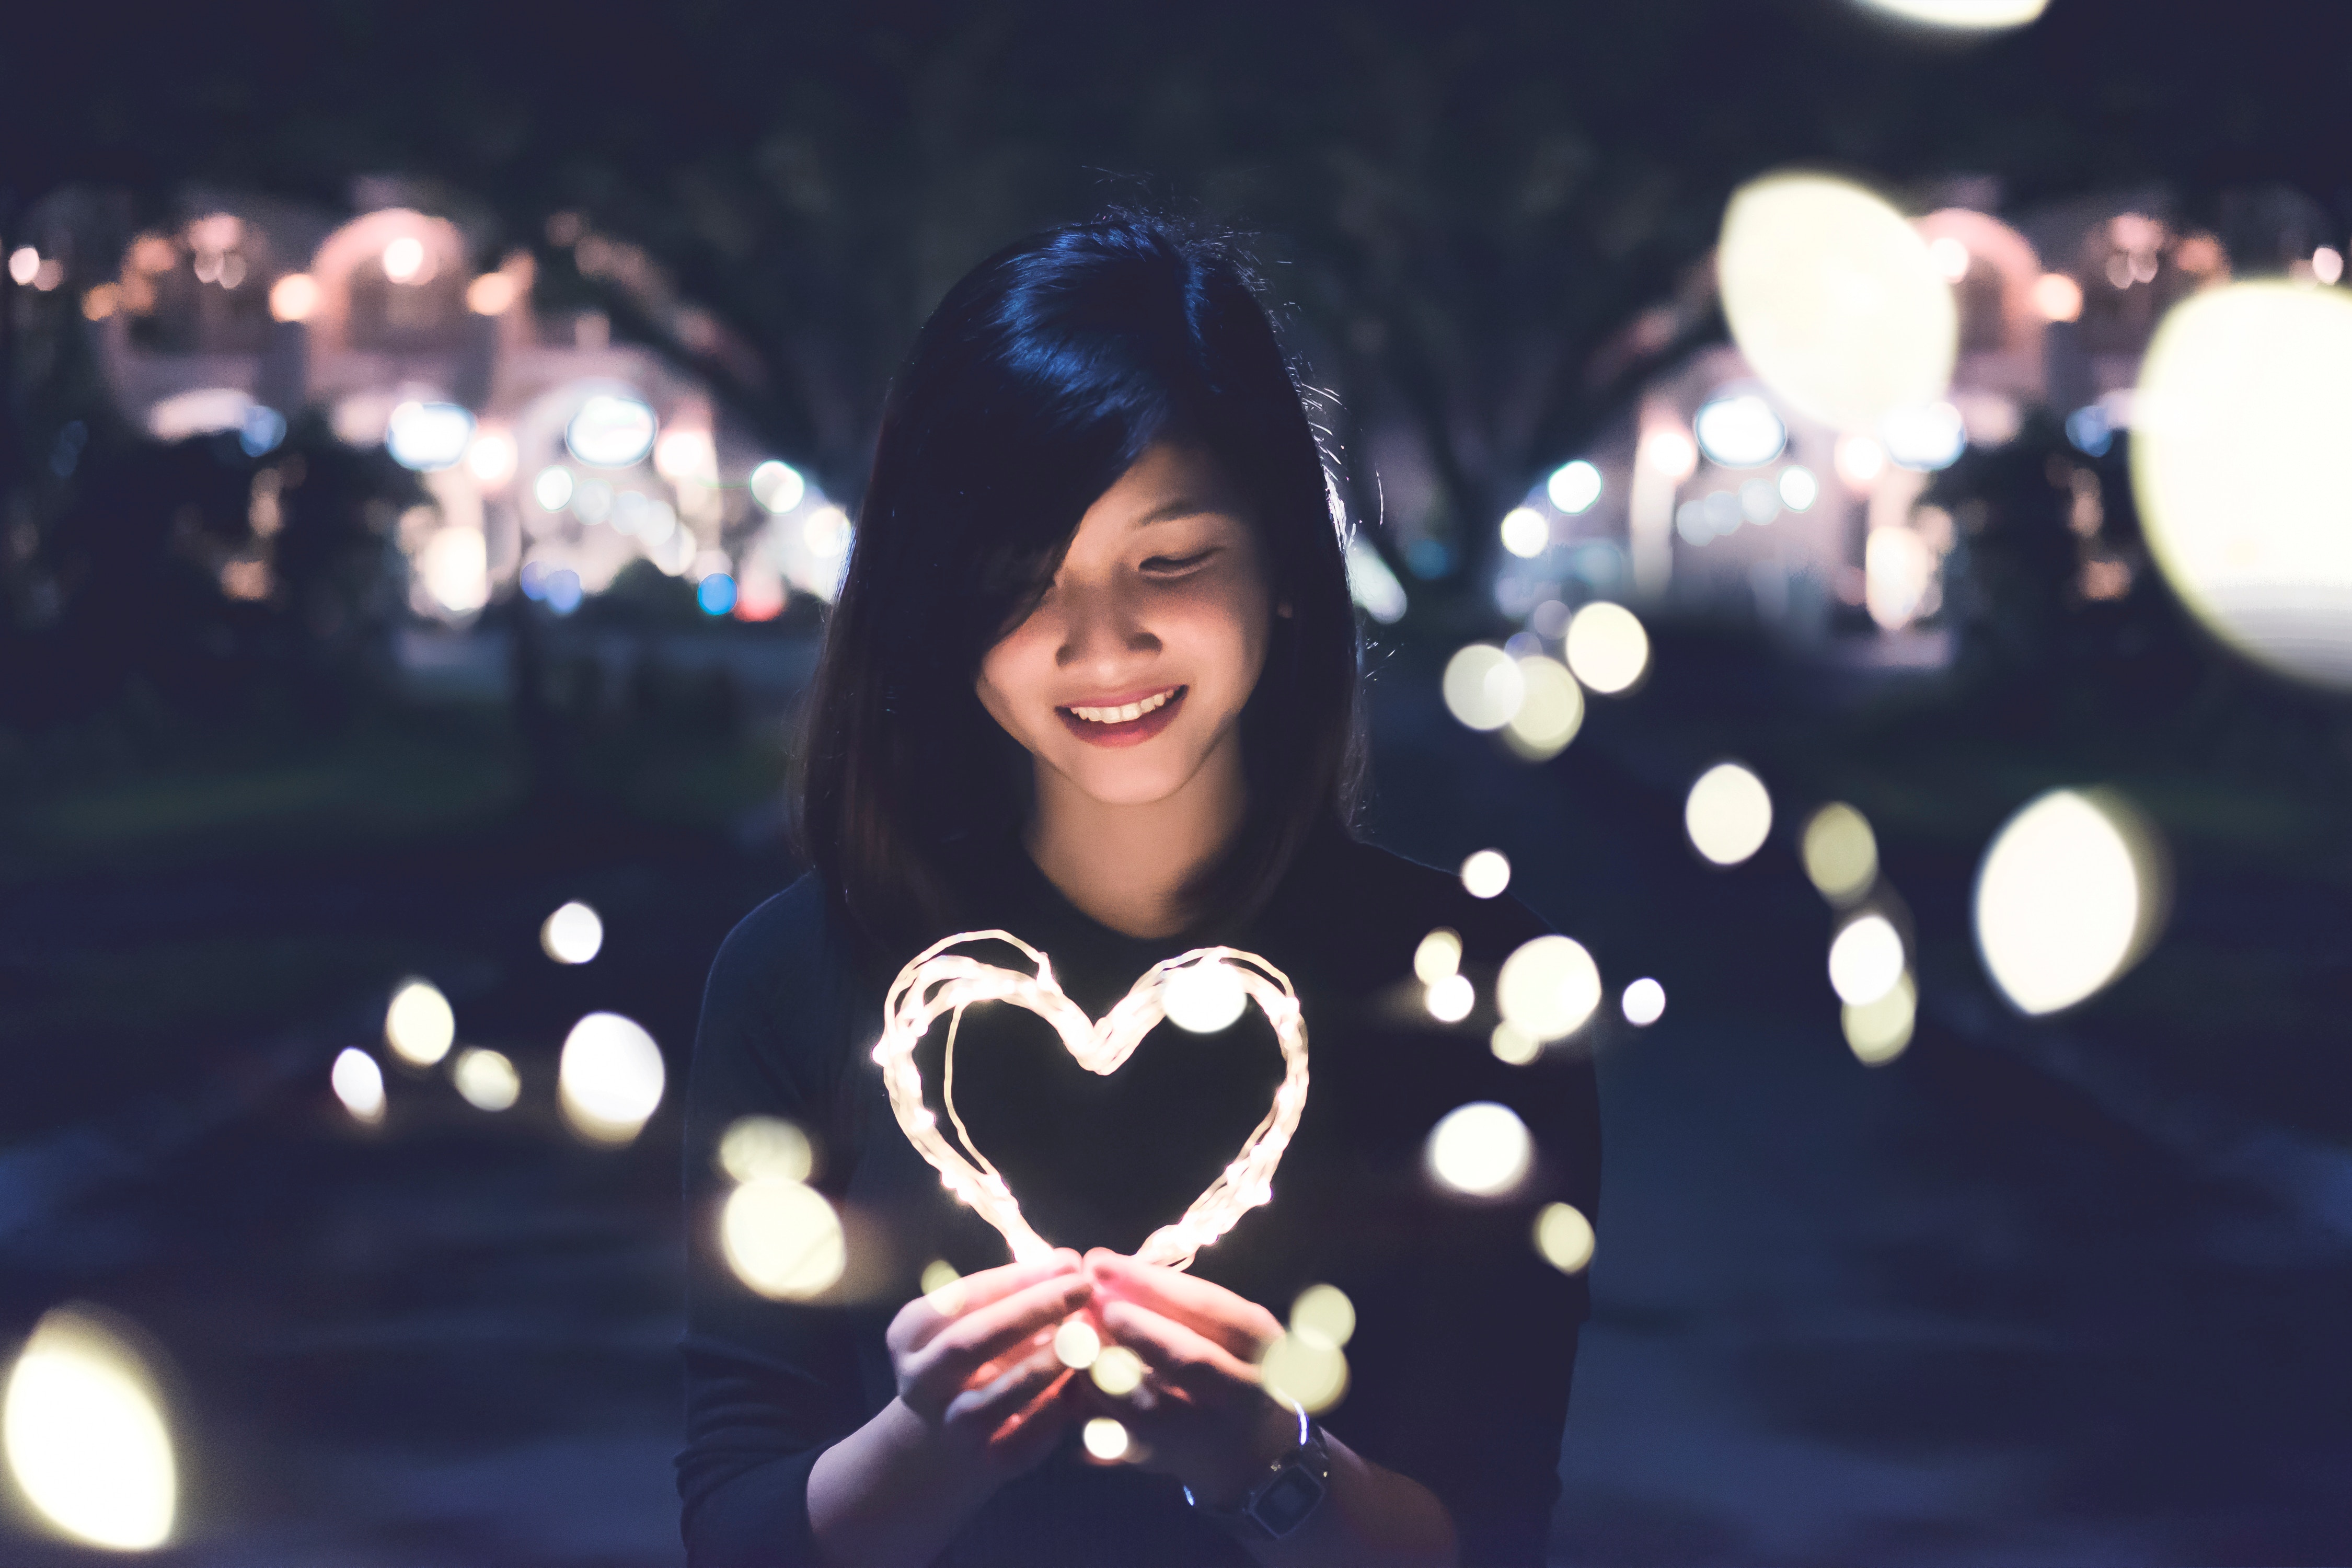 Woman smiling holding lights shaped as a heart.